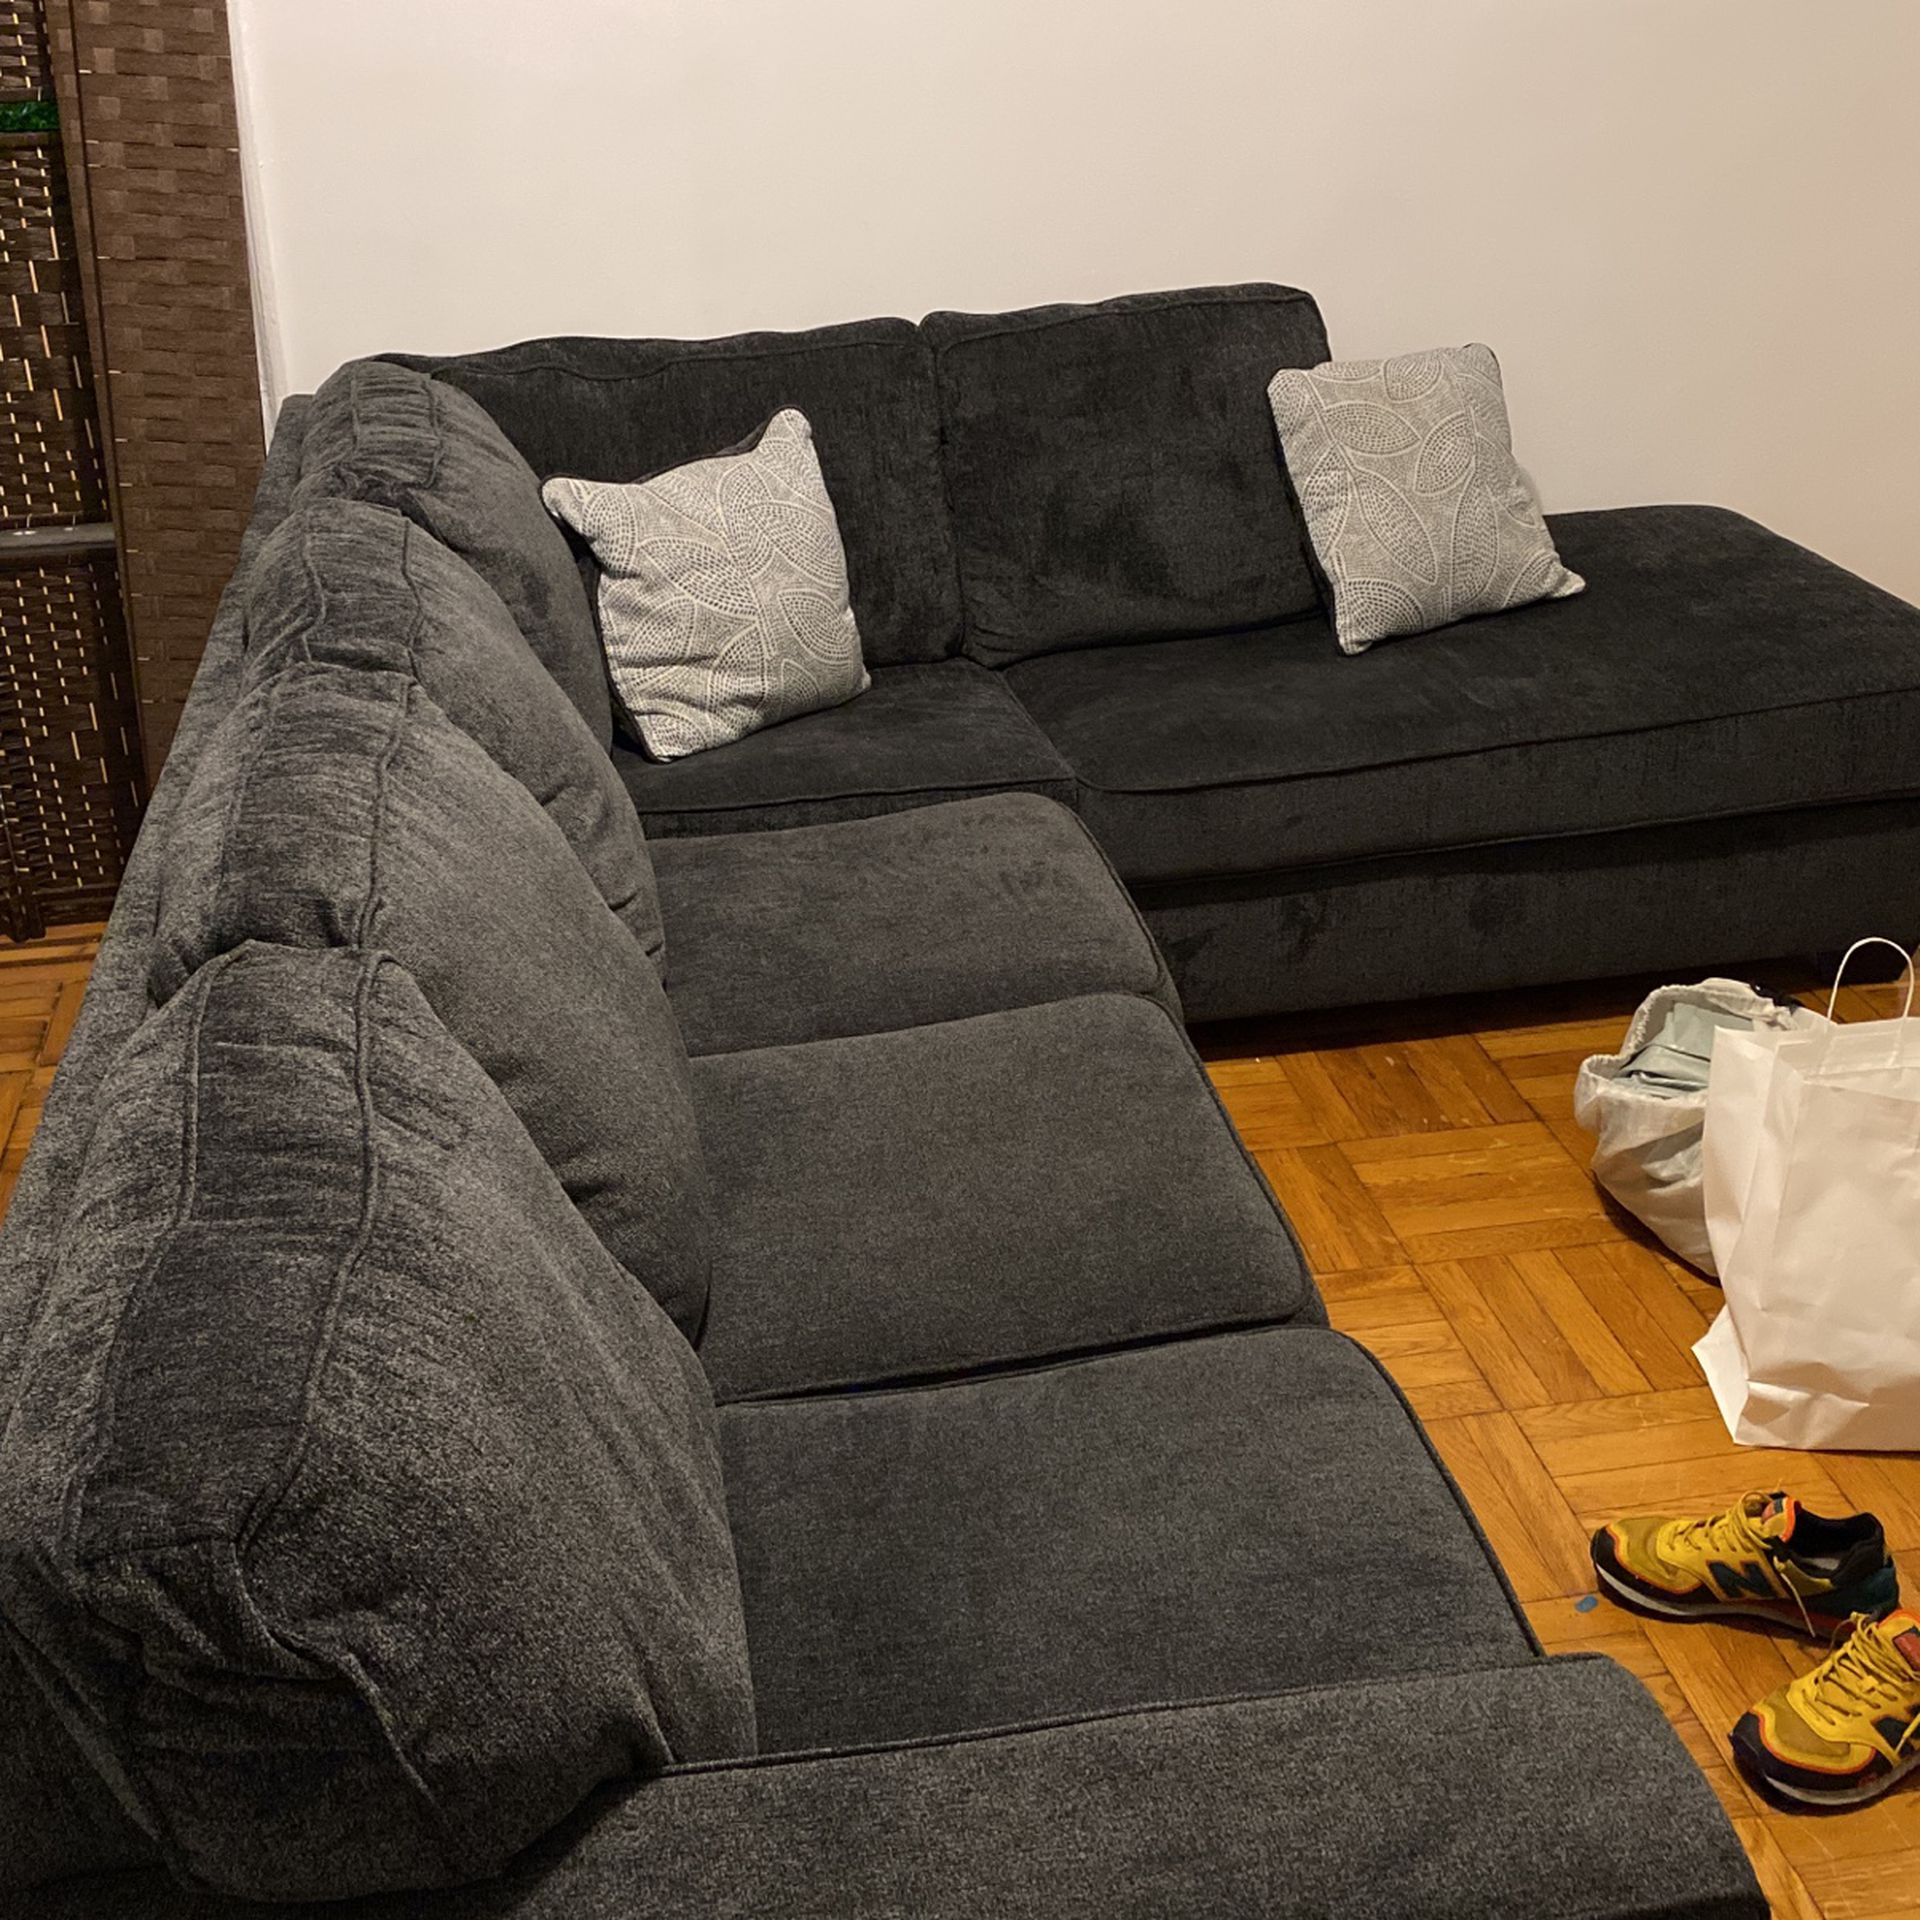 Couch 100% Brand new , No Stains , Still Firm , No Marks. 